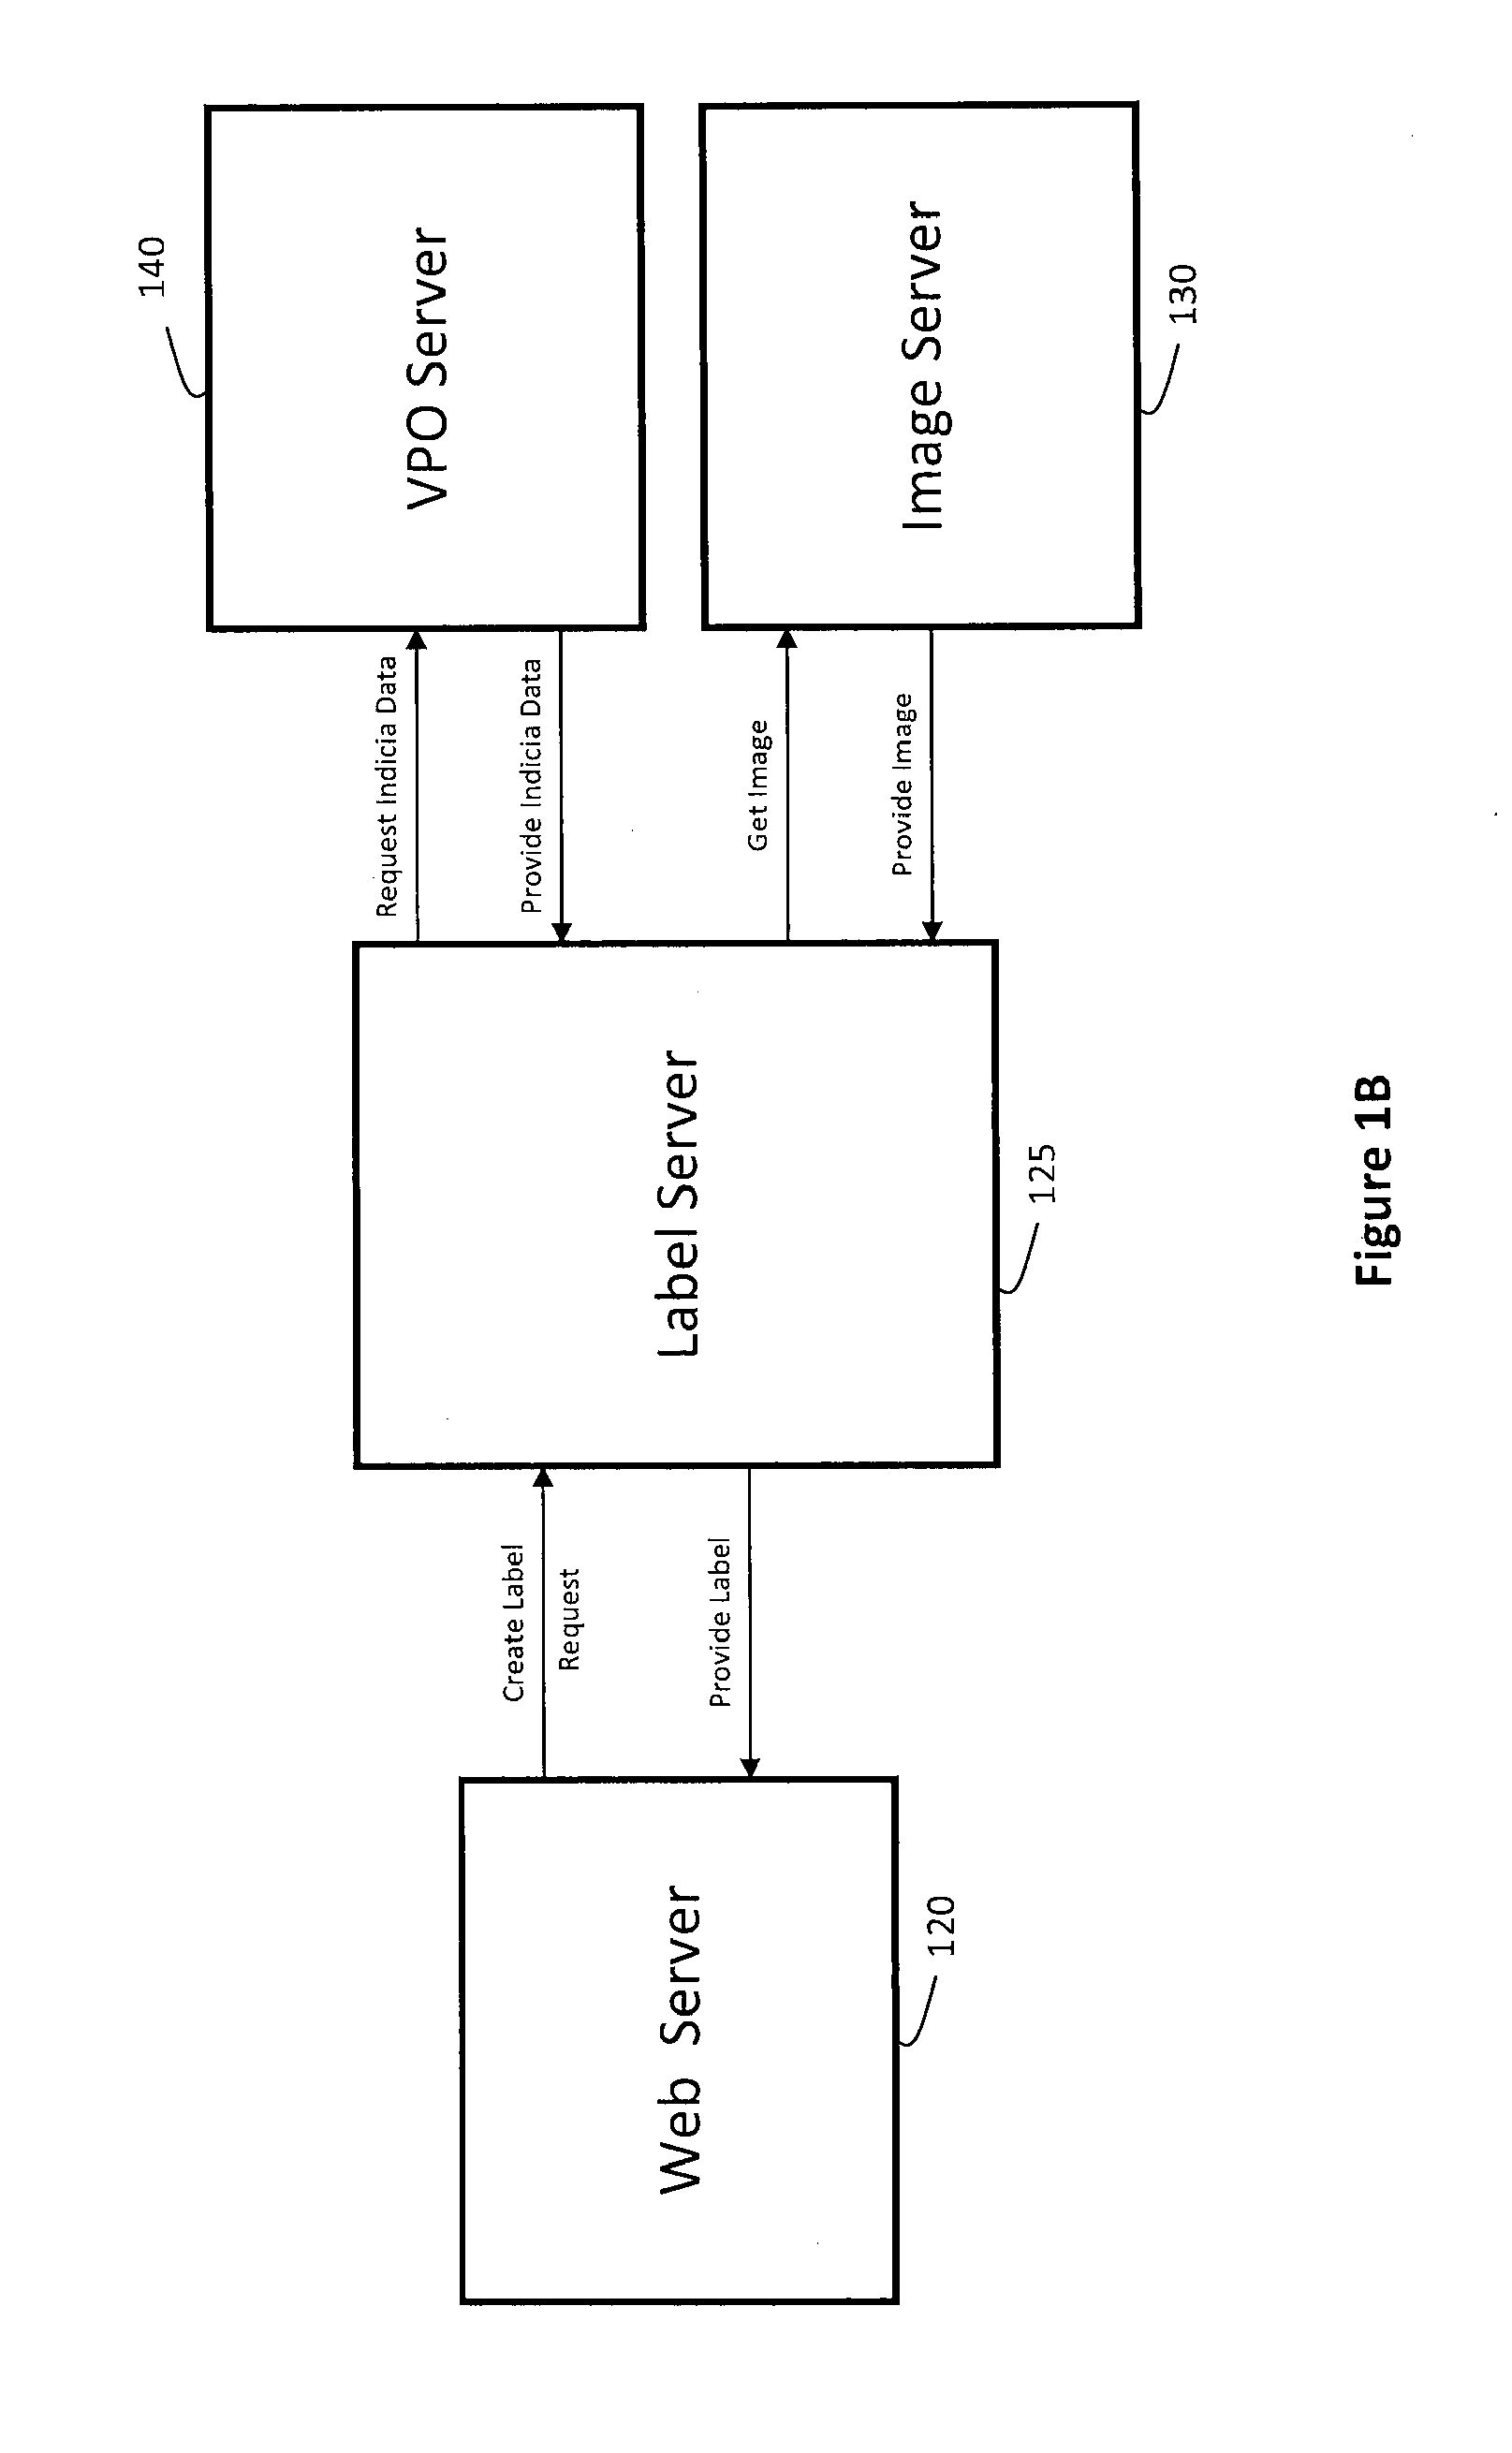 System and method for providing an extensible multinational postage service and system and method that delivers printable postage to a client device